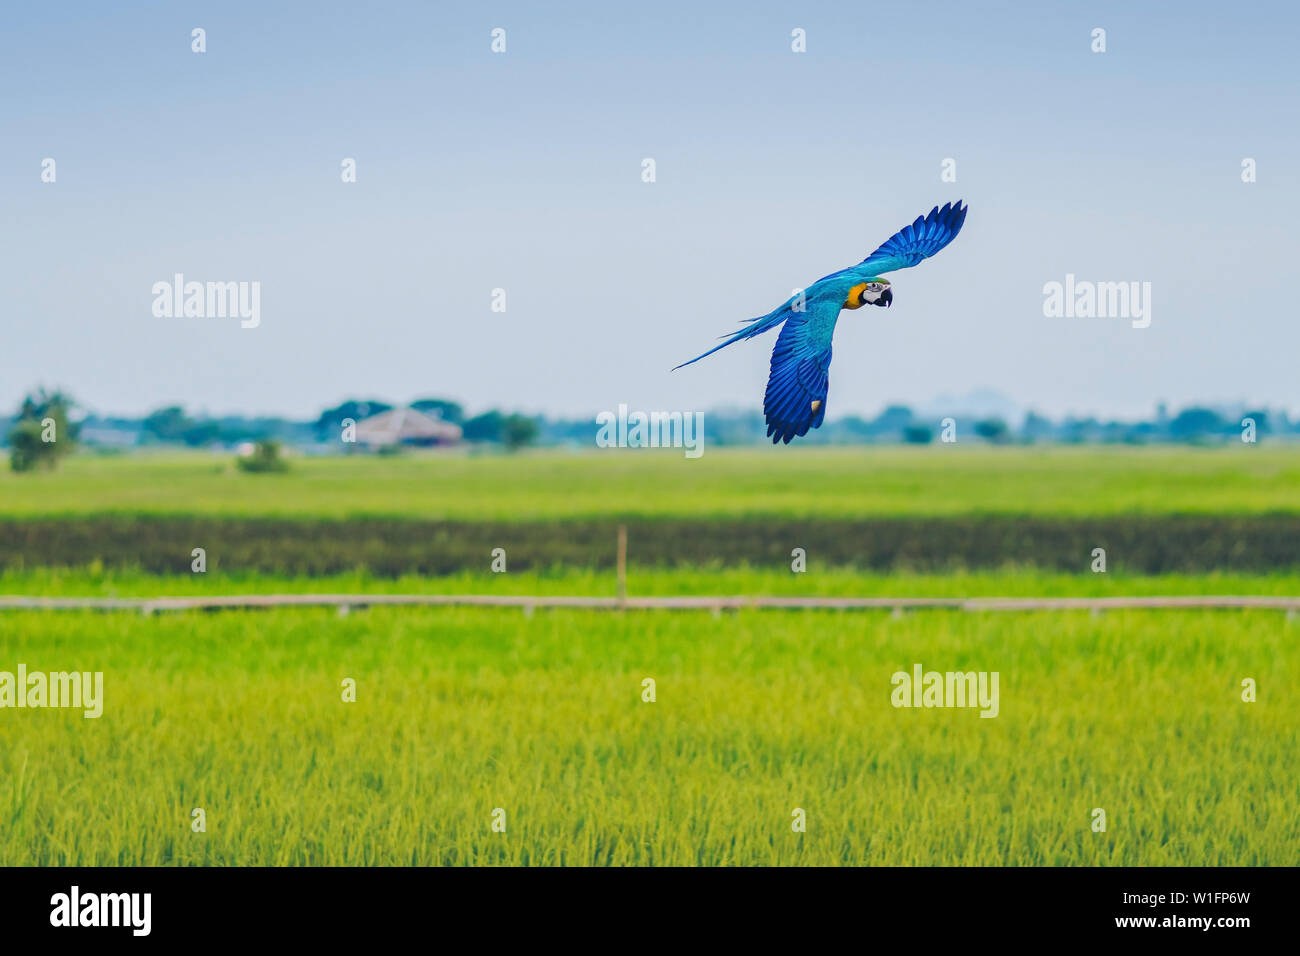 Colorful of the macaw parrot practice flying in the fields. Stock Photo